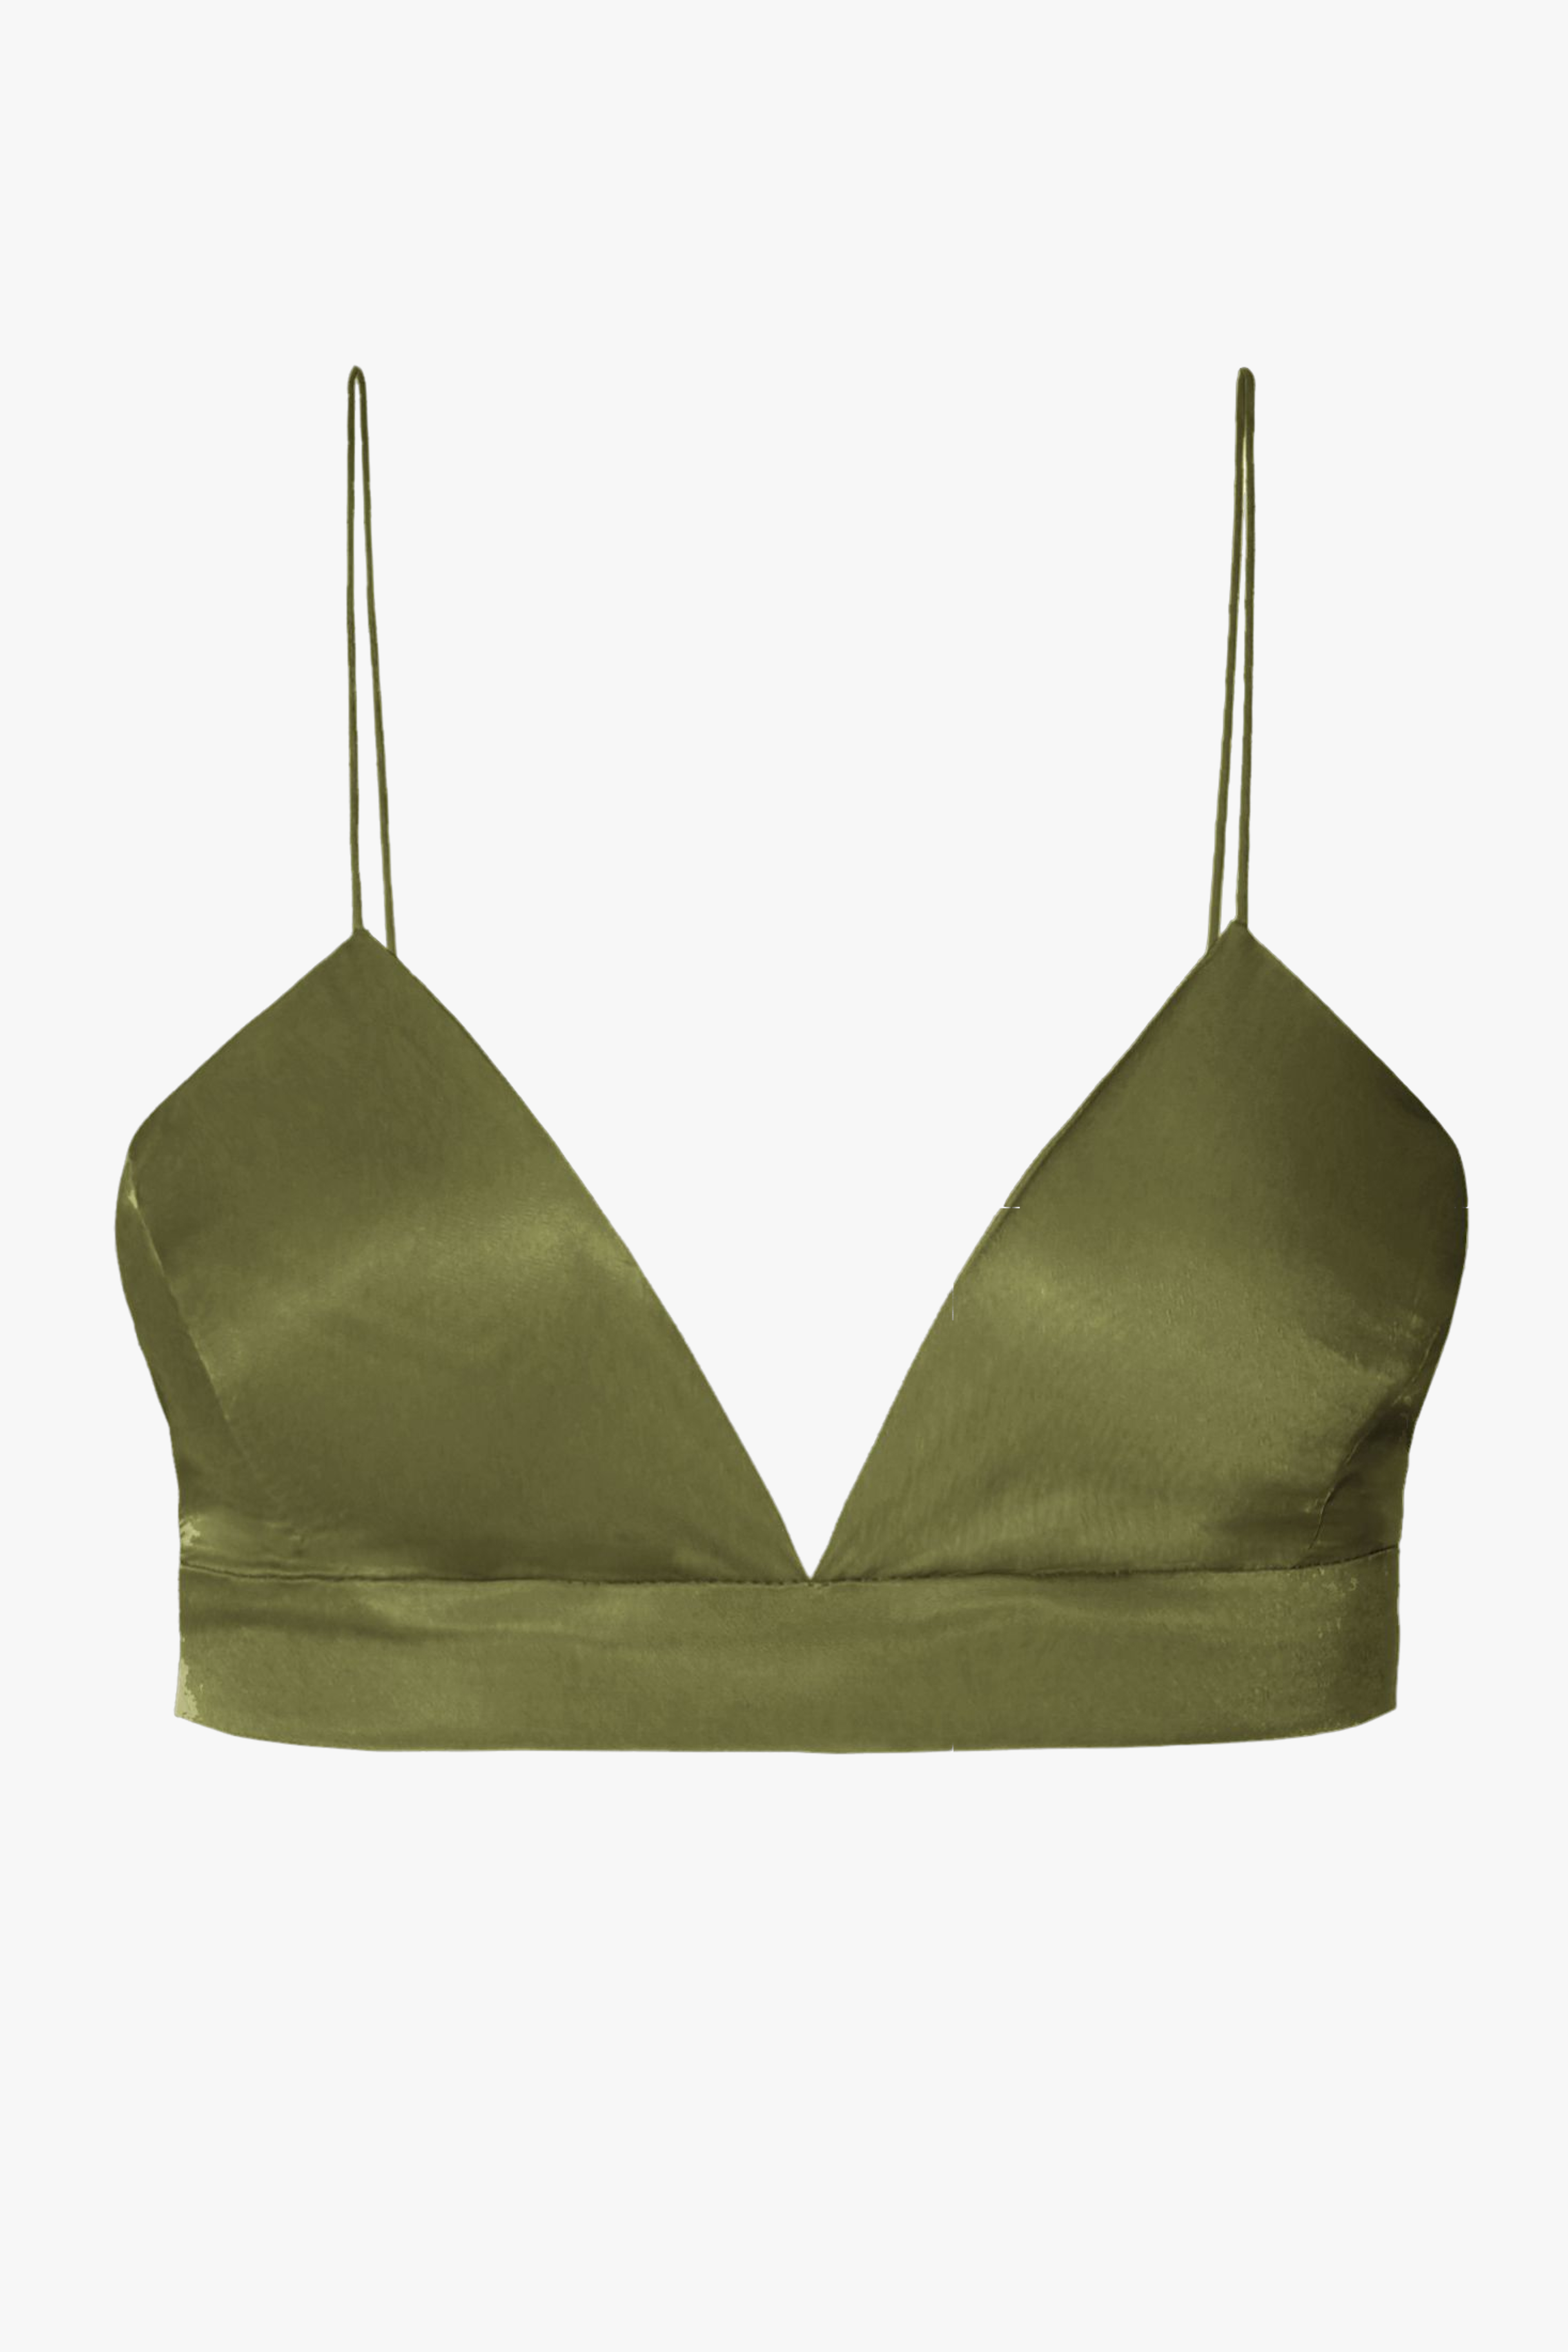 Shop Bralette top Asha Satin Olive Branch from AGGI at Seezona